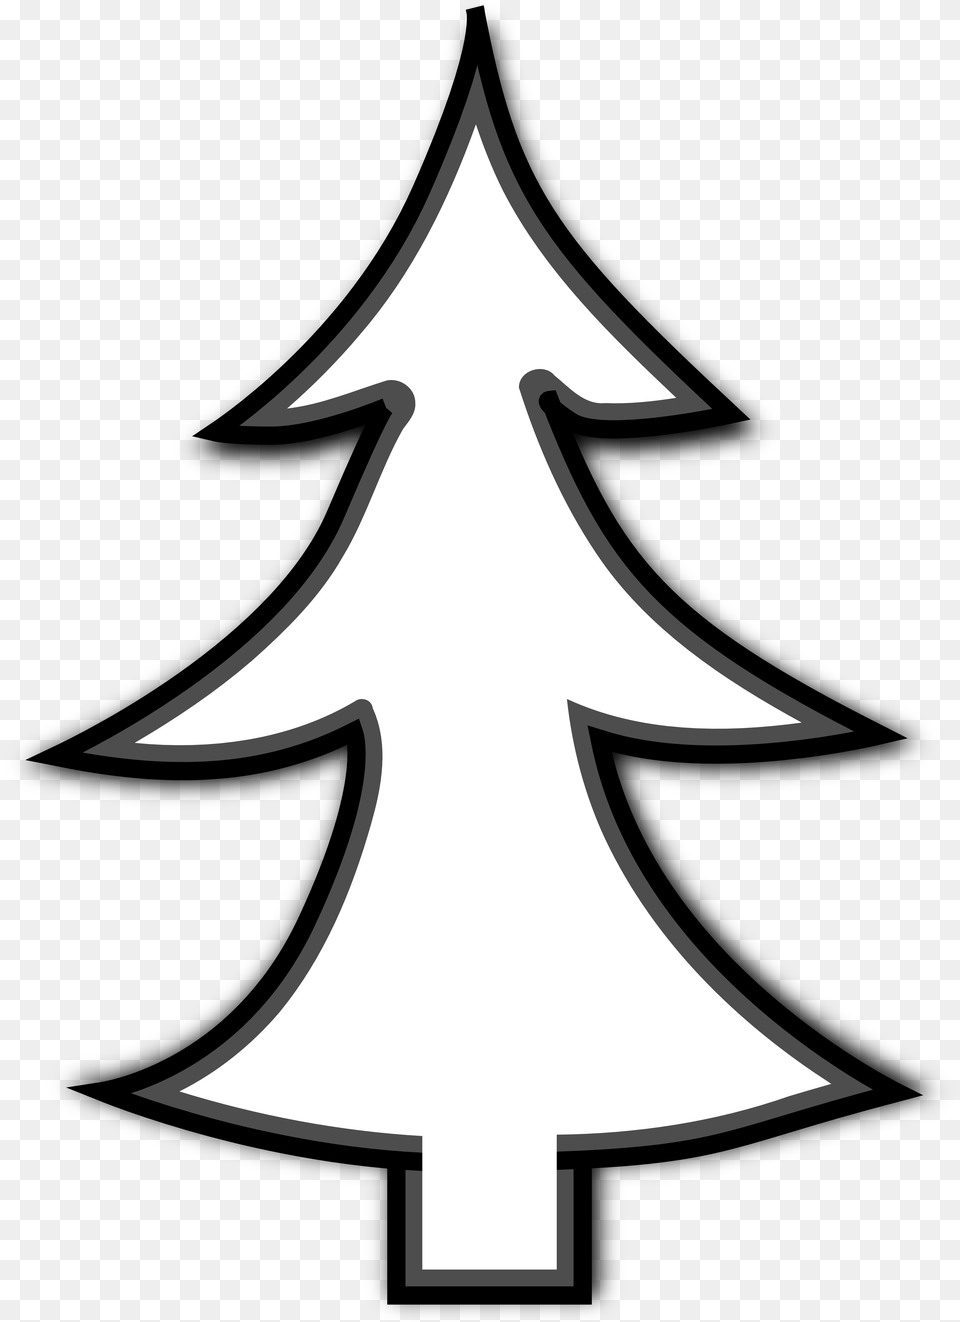 Life Clipart White Tree Transparent Free Christmas Trees Clipart, Stencil, Bow, Weapon, Christmas Decorations Png Image